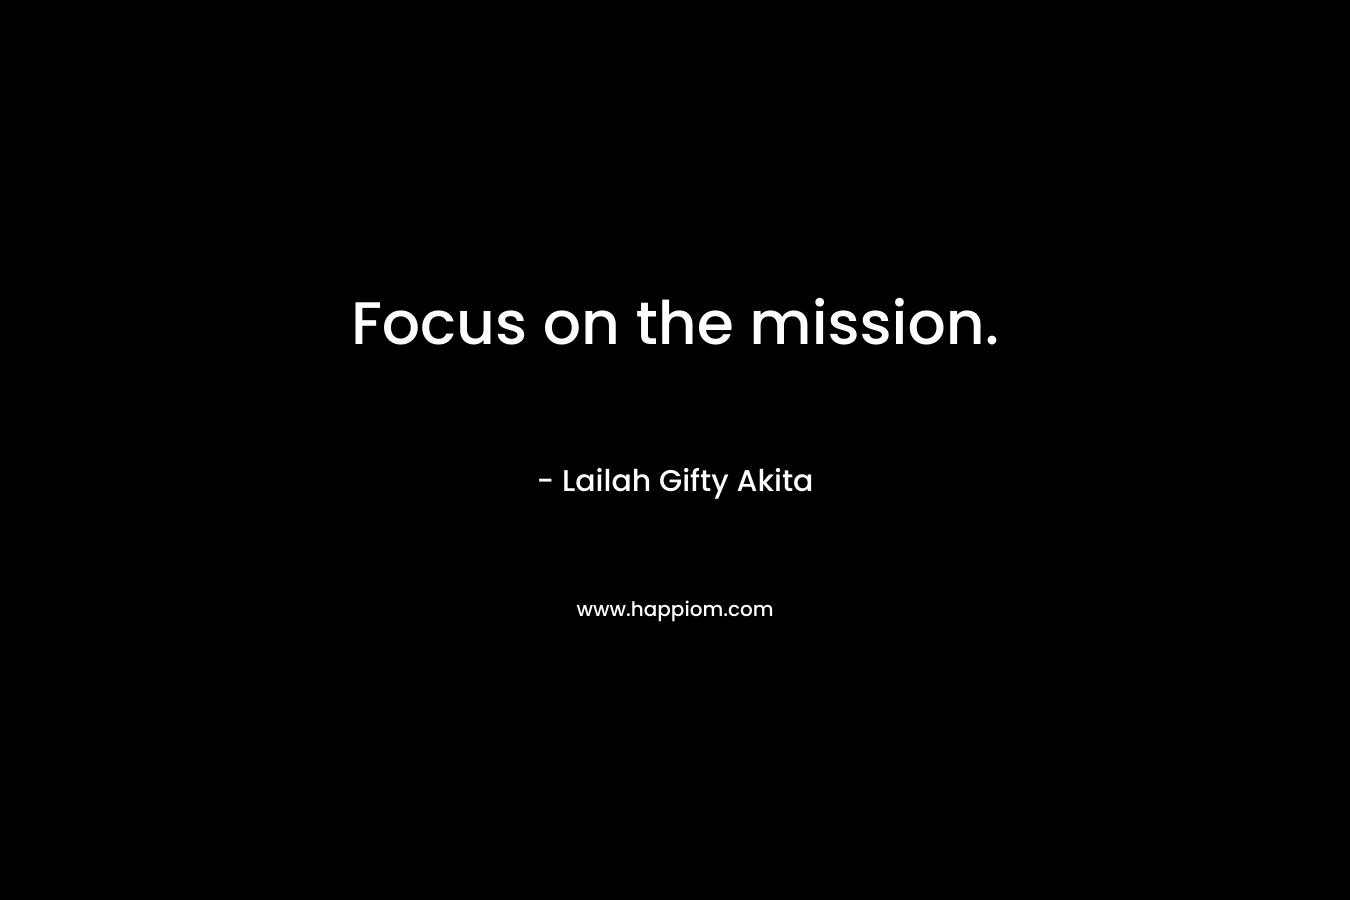 Focus on the mission.